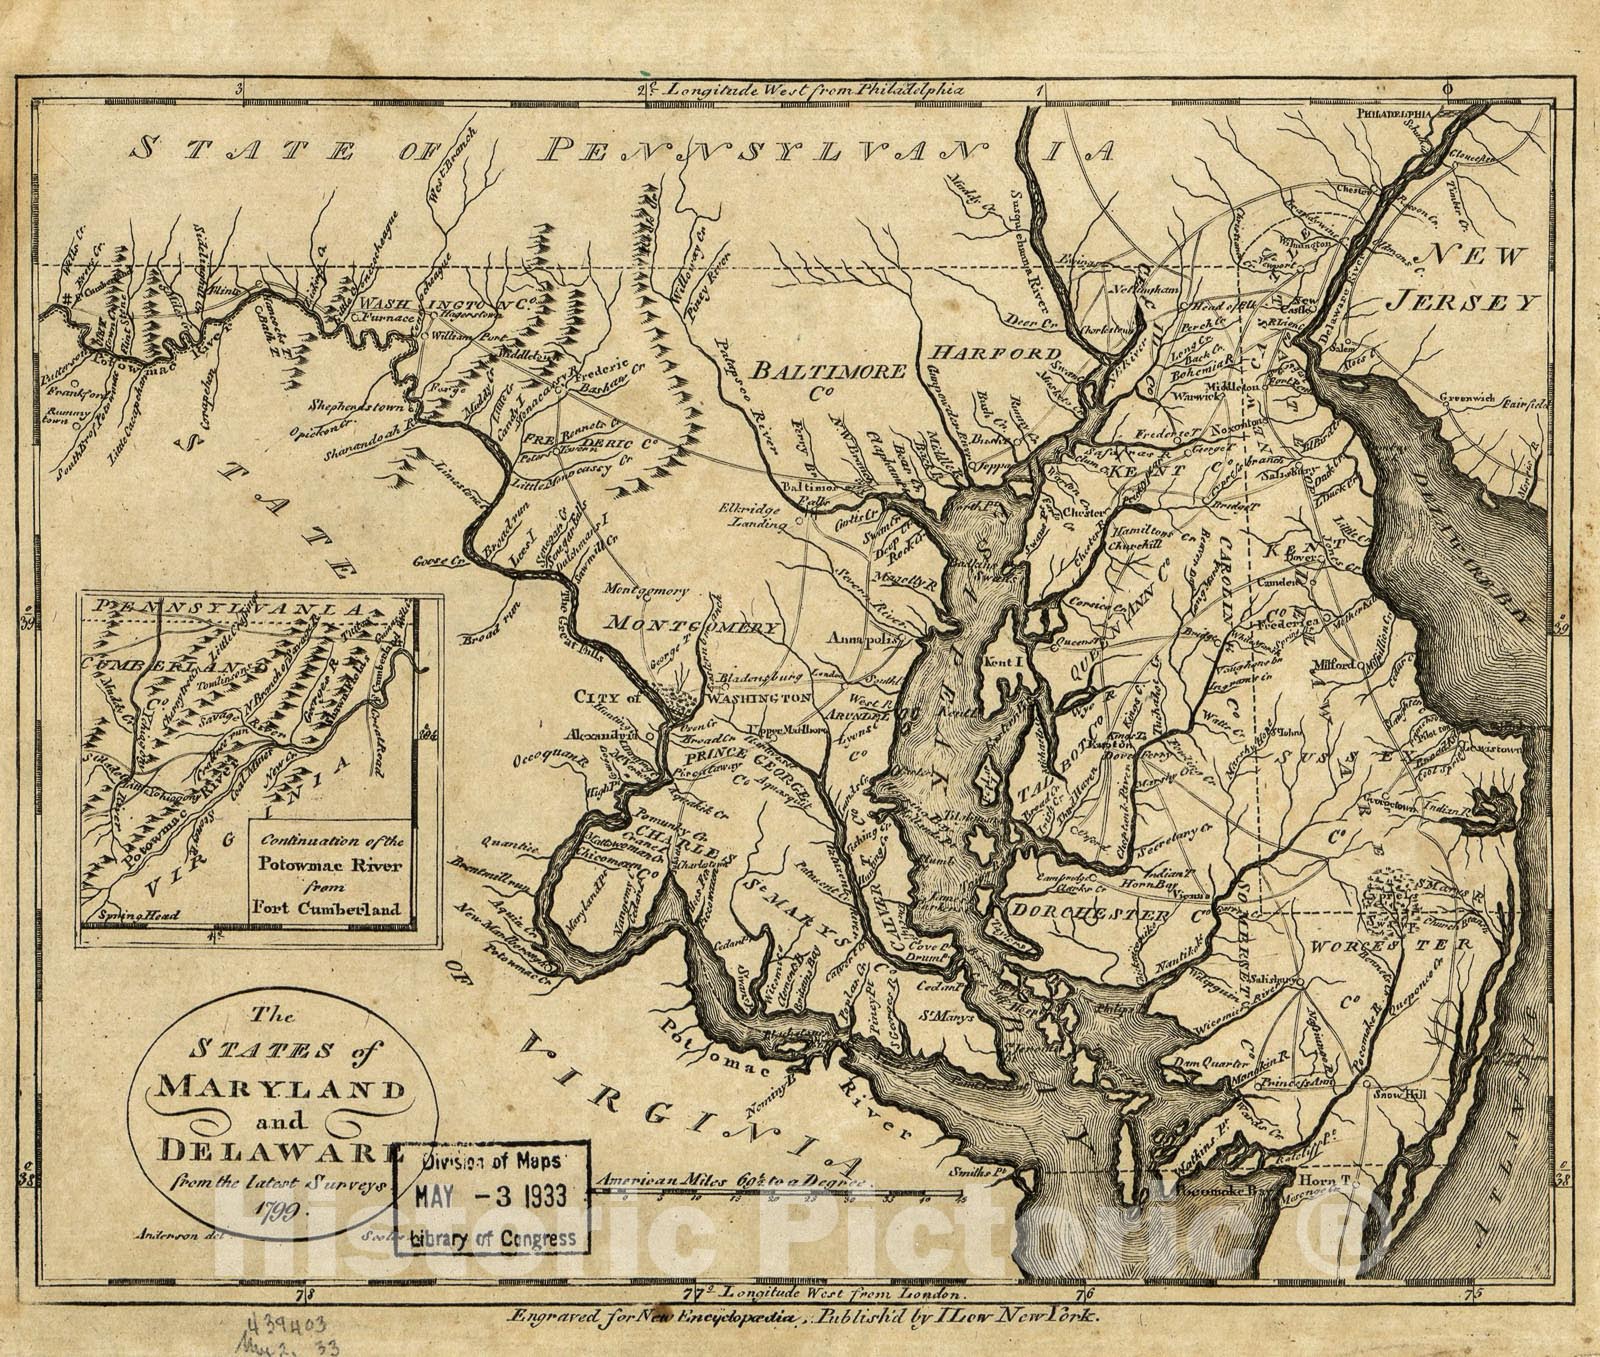 Historic 1799 Map - The States of Maryland and Delaware from The Latest surveys, 1799.